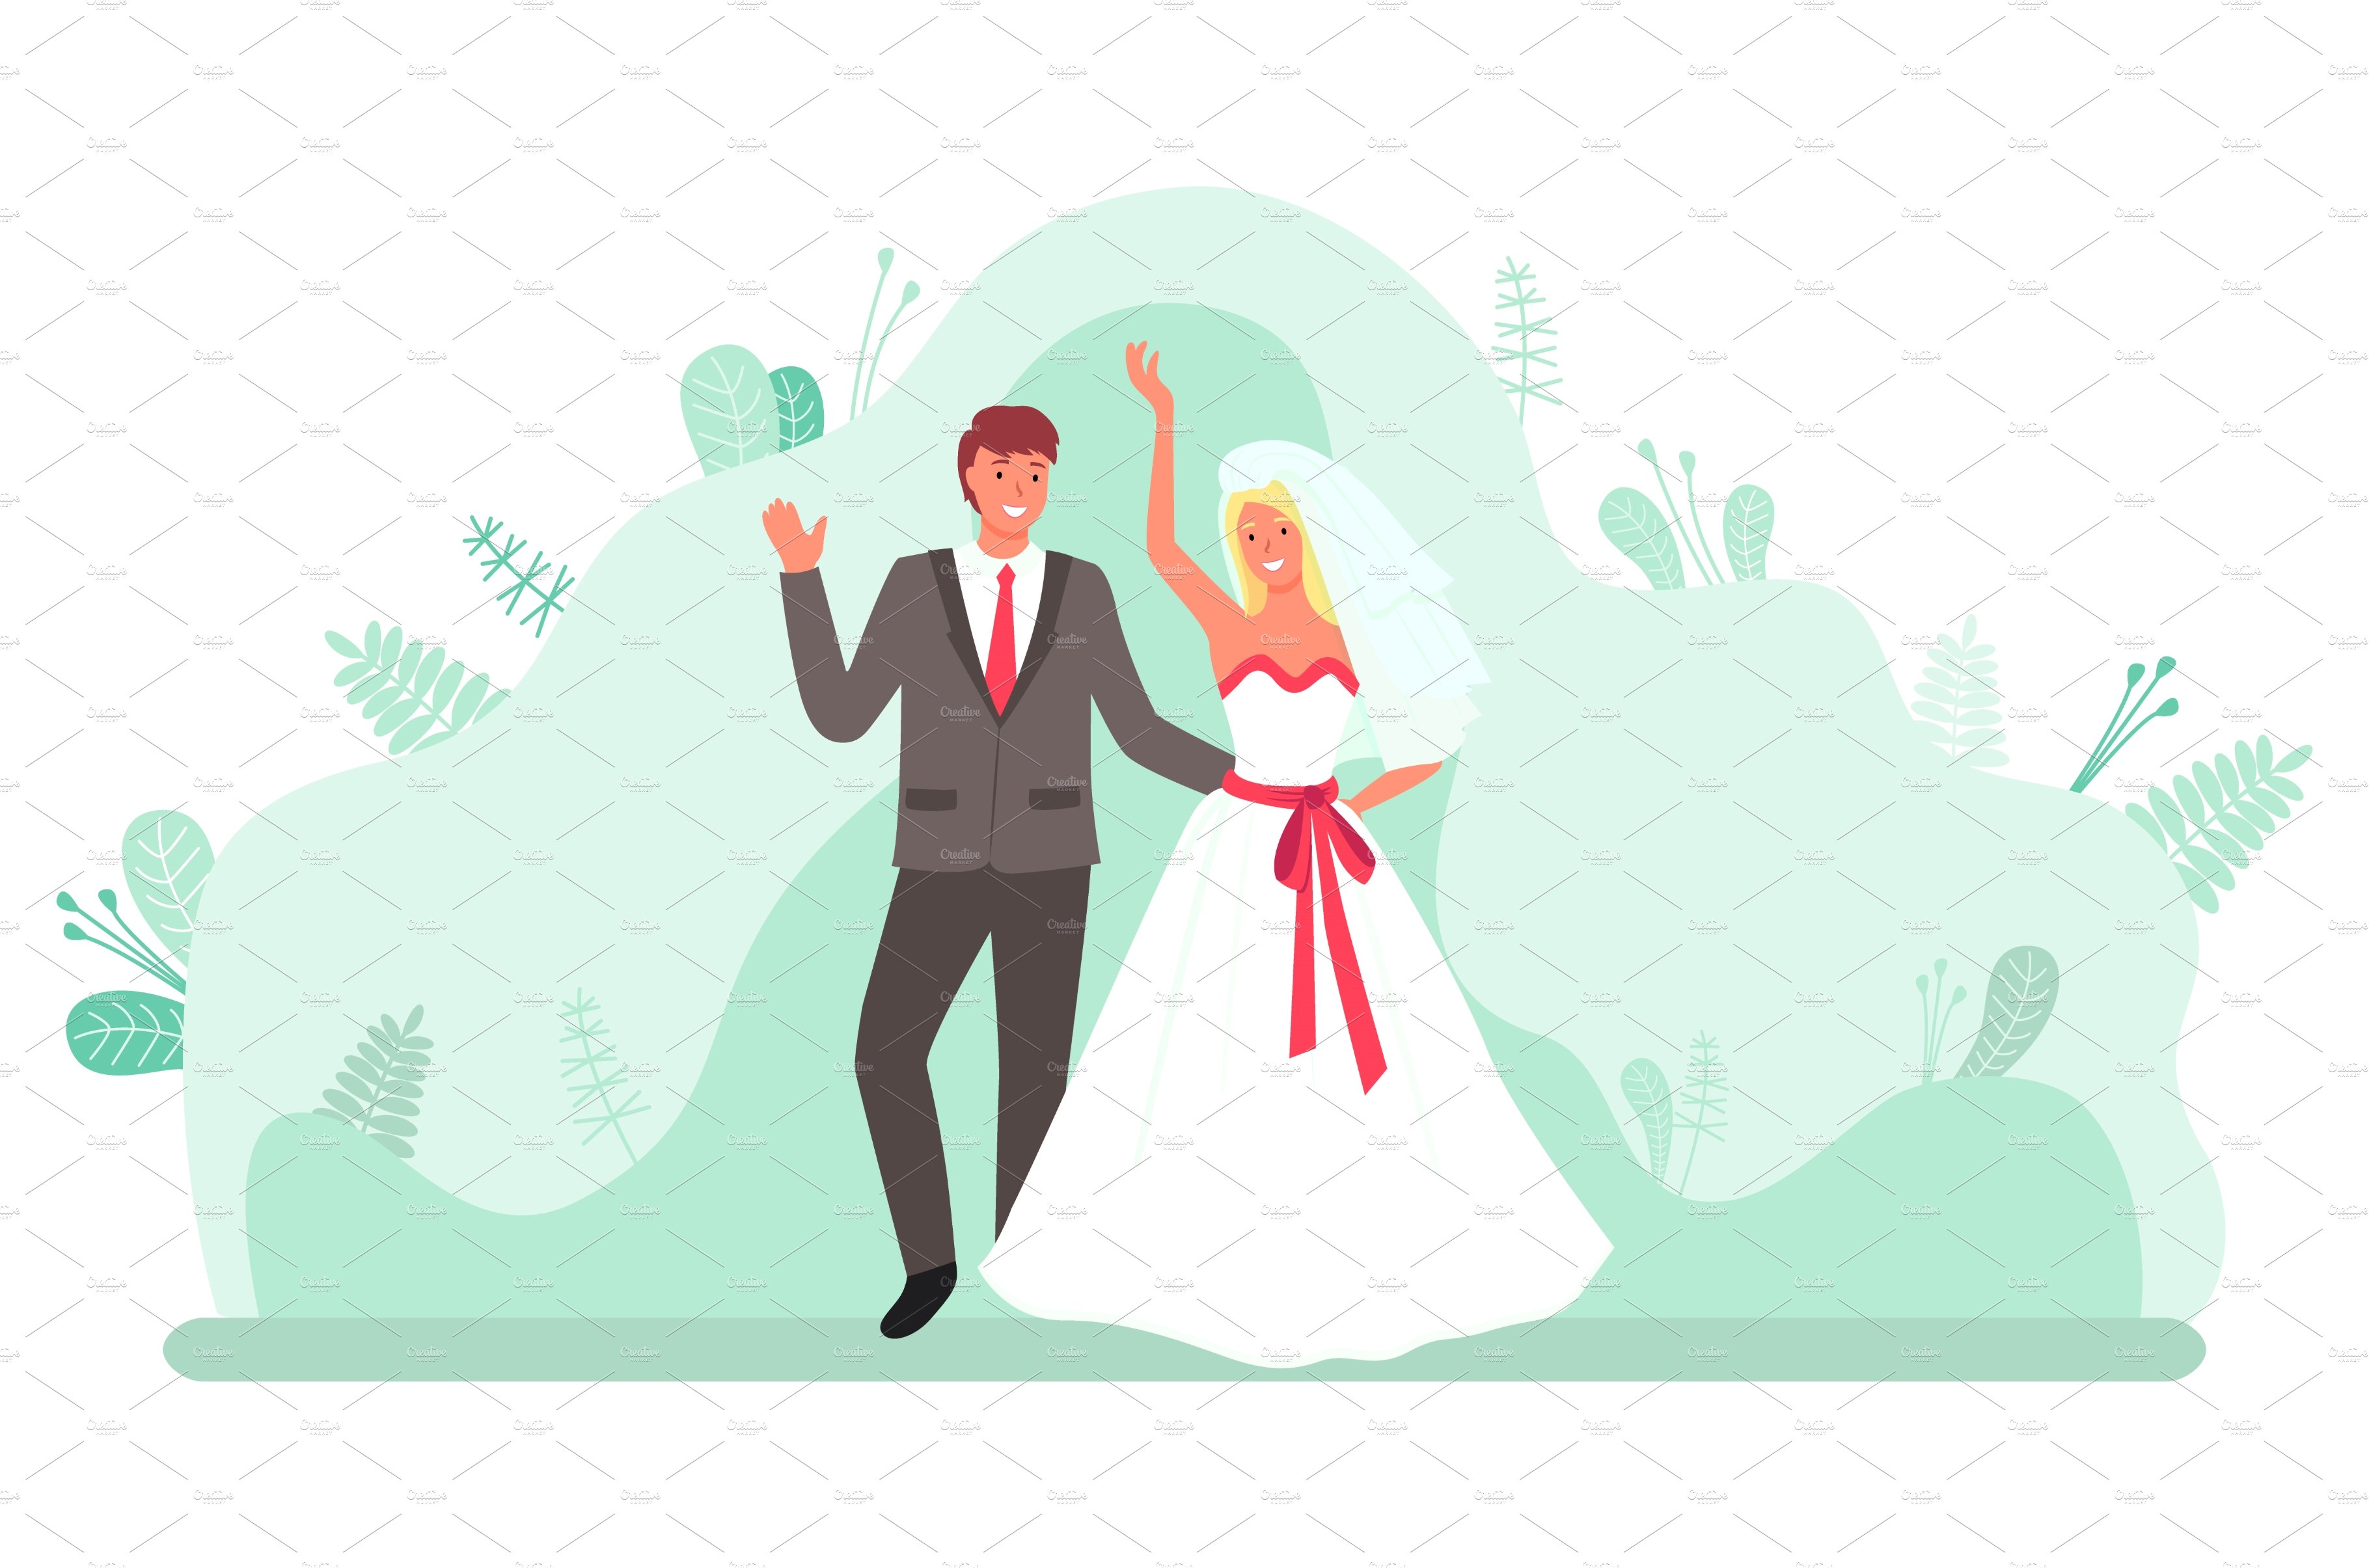 Wedding Ceremony of Bride and Groom cover image.